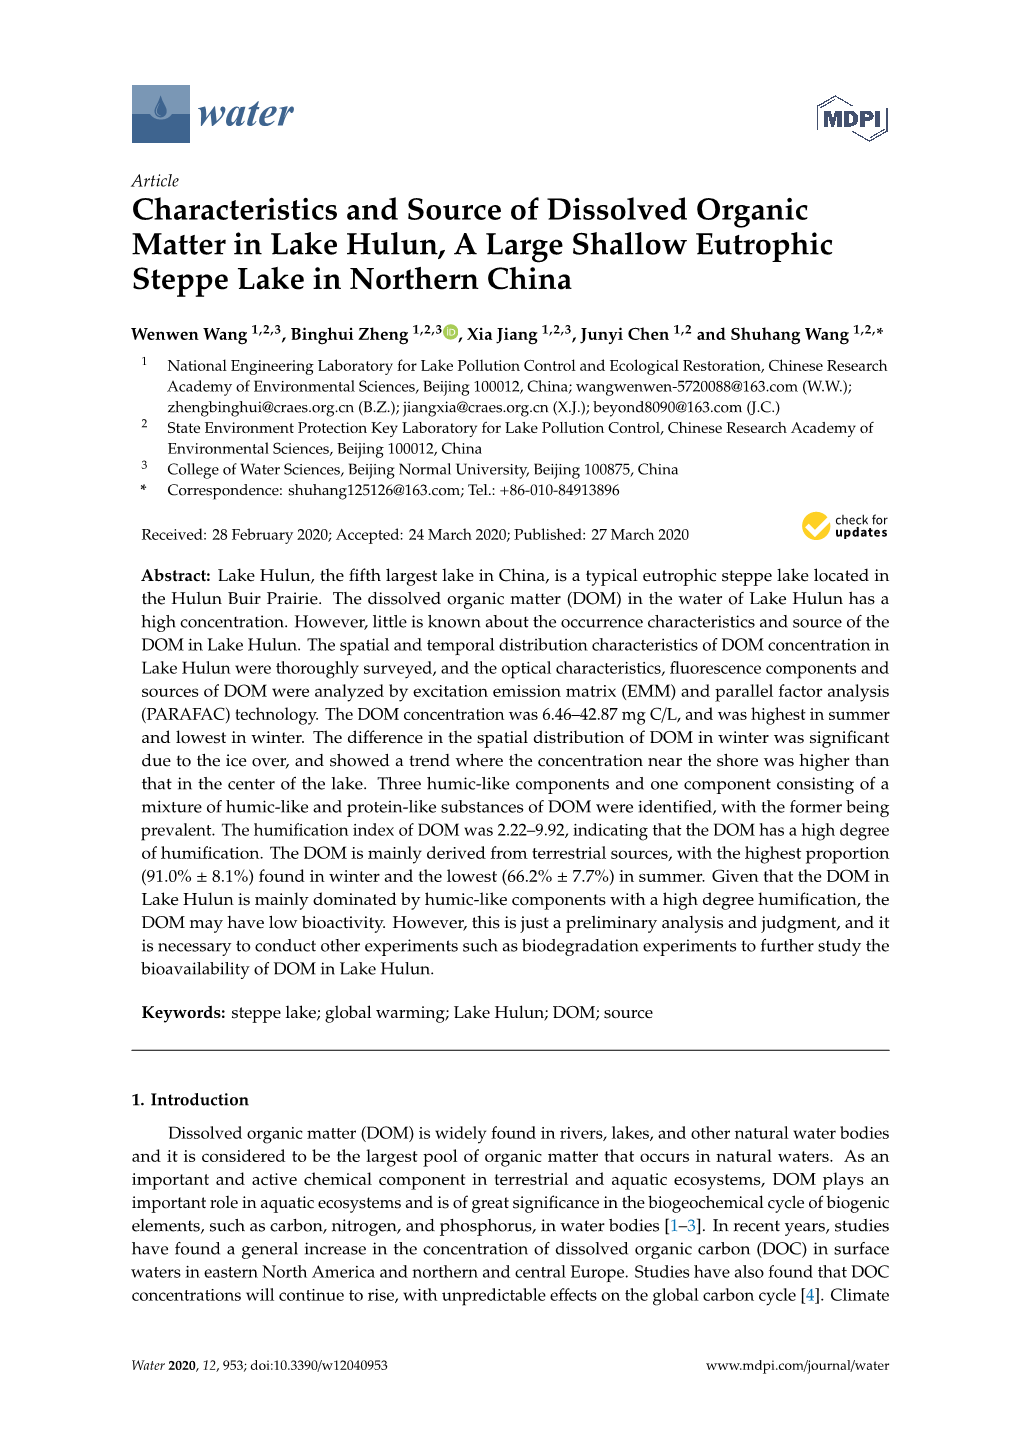 Characteristics and Source of Dissolved Organic Matter in Lake Hulun, a Large Shallow Eutrophic Steppe Lake in Northern China